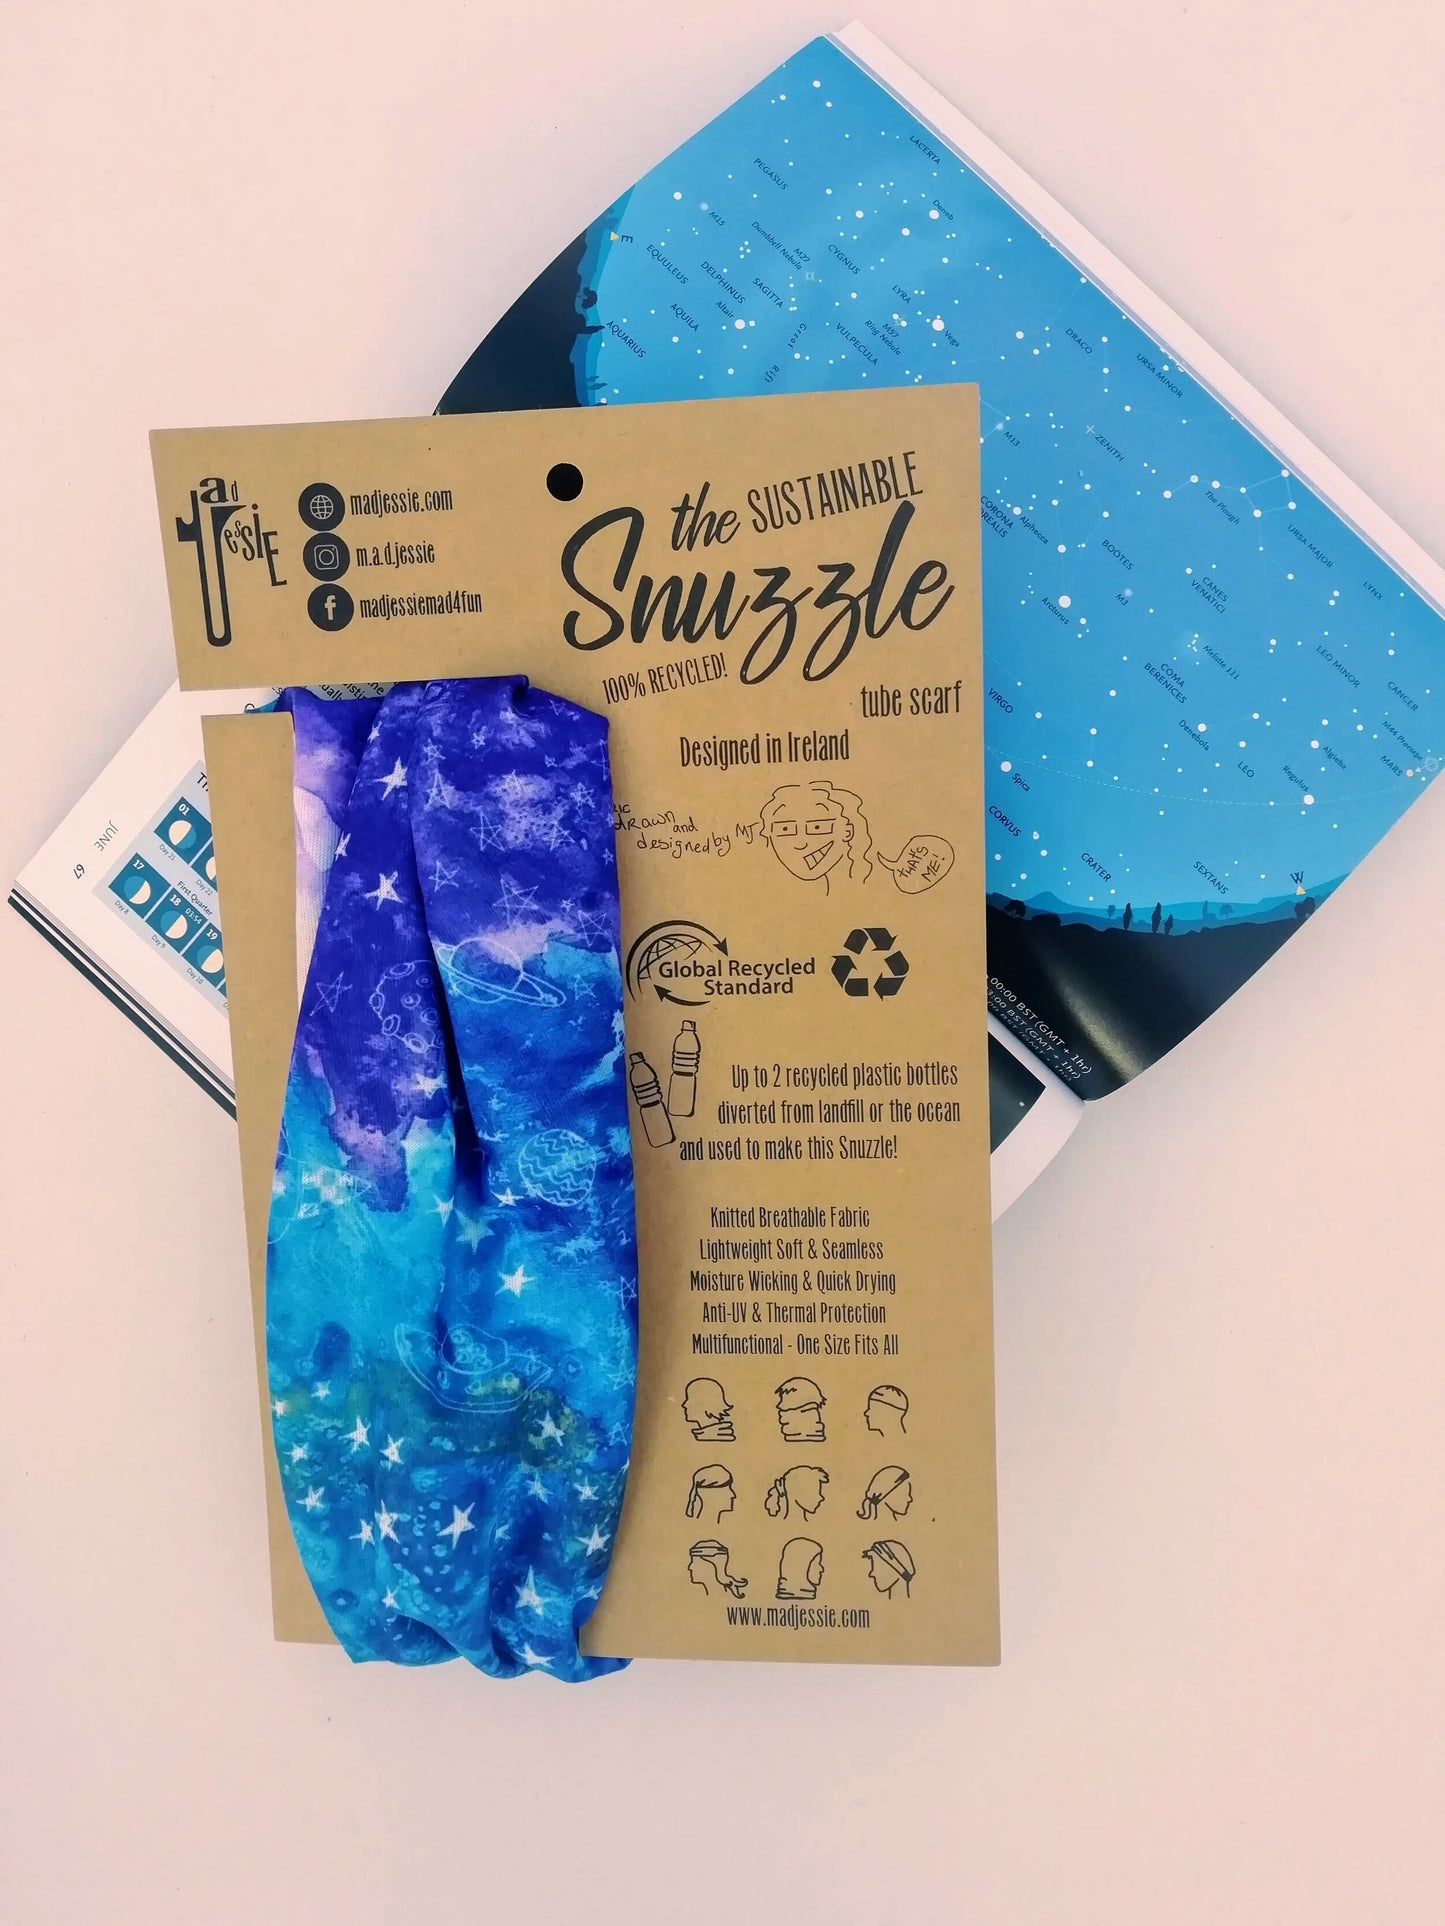 Space! Sustainable Snuzzle